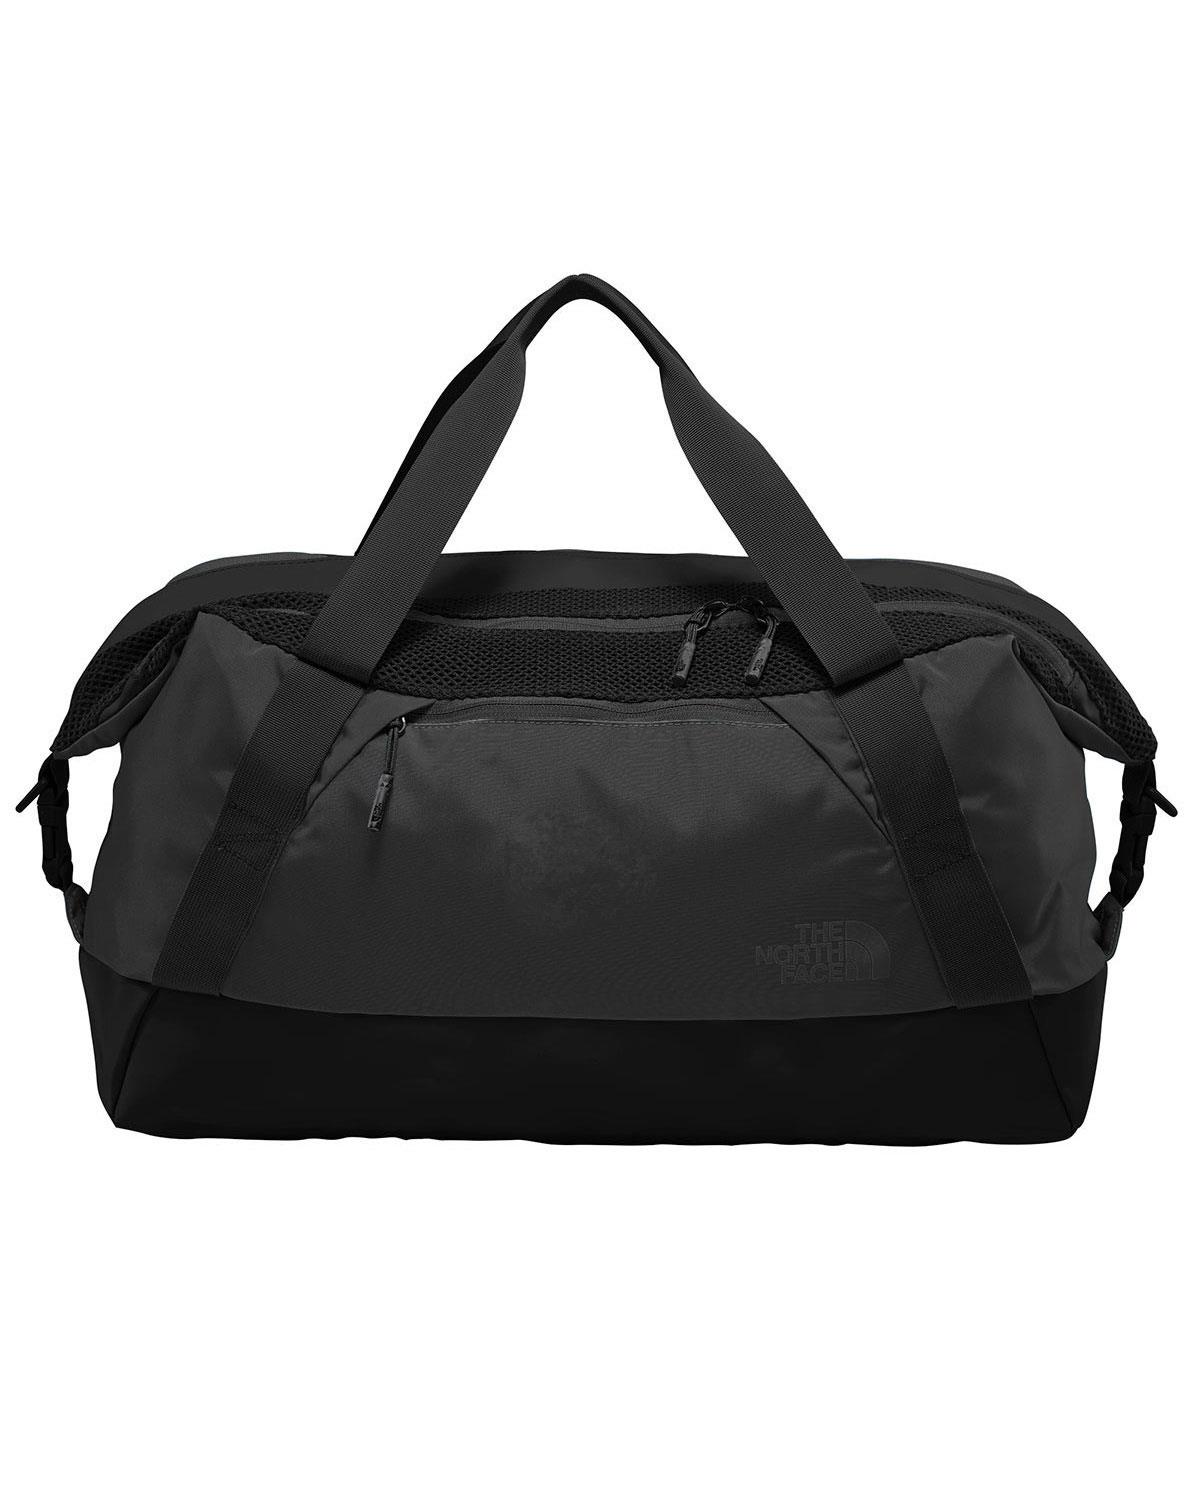 Size Chart for The North Face NF0A3KXX Apex Duffel - A2ZClothing.com